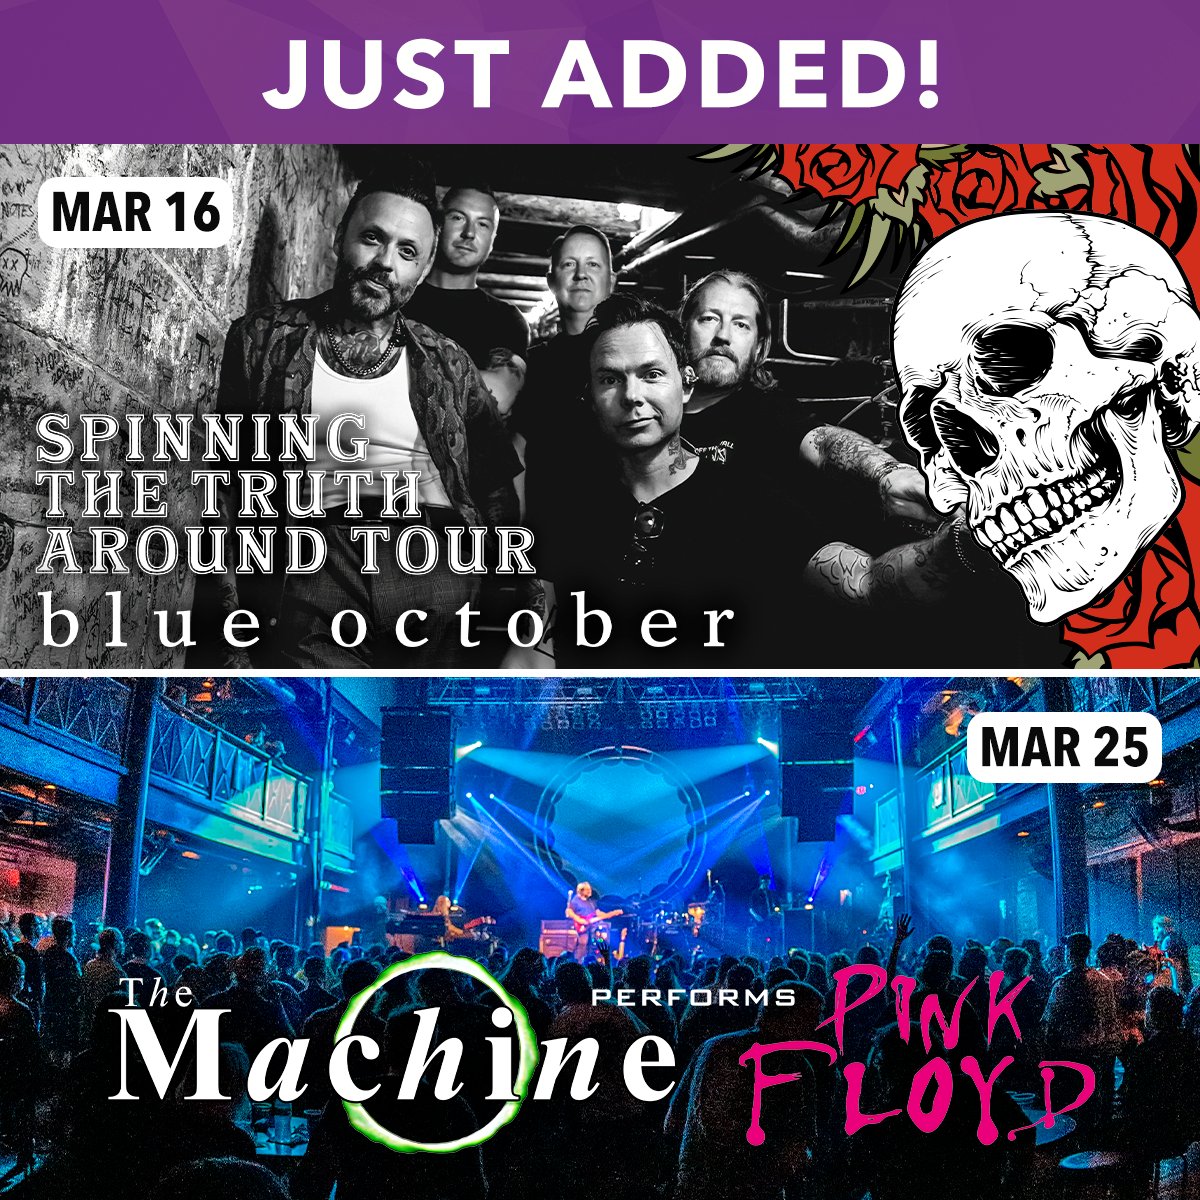 JUST ADDED! Blue October member pre sale live now! The Machine member pre sale live tomorrow, Tues, Nov 29 at 10AM. General on sale this Fri, Dec 2 at 10AM.⁠ ⁠ @blueoctober Thurs, March 16, 2023 at 8PM⁠ ⁠ @themachinelive⁠ Sat, March 25, 2023 @ 8PM⁠